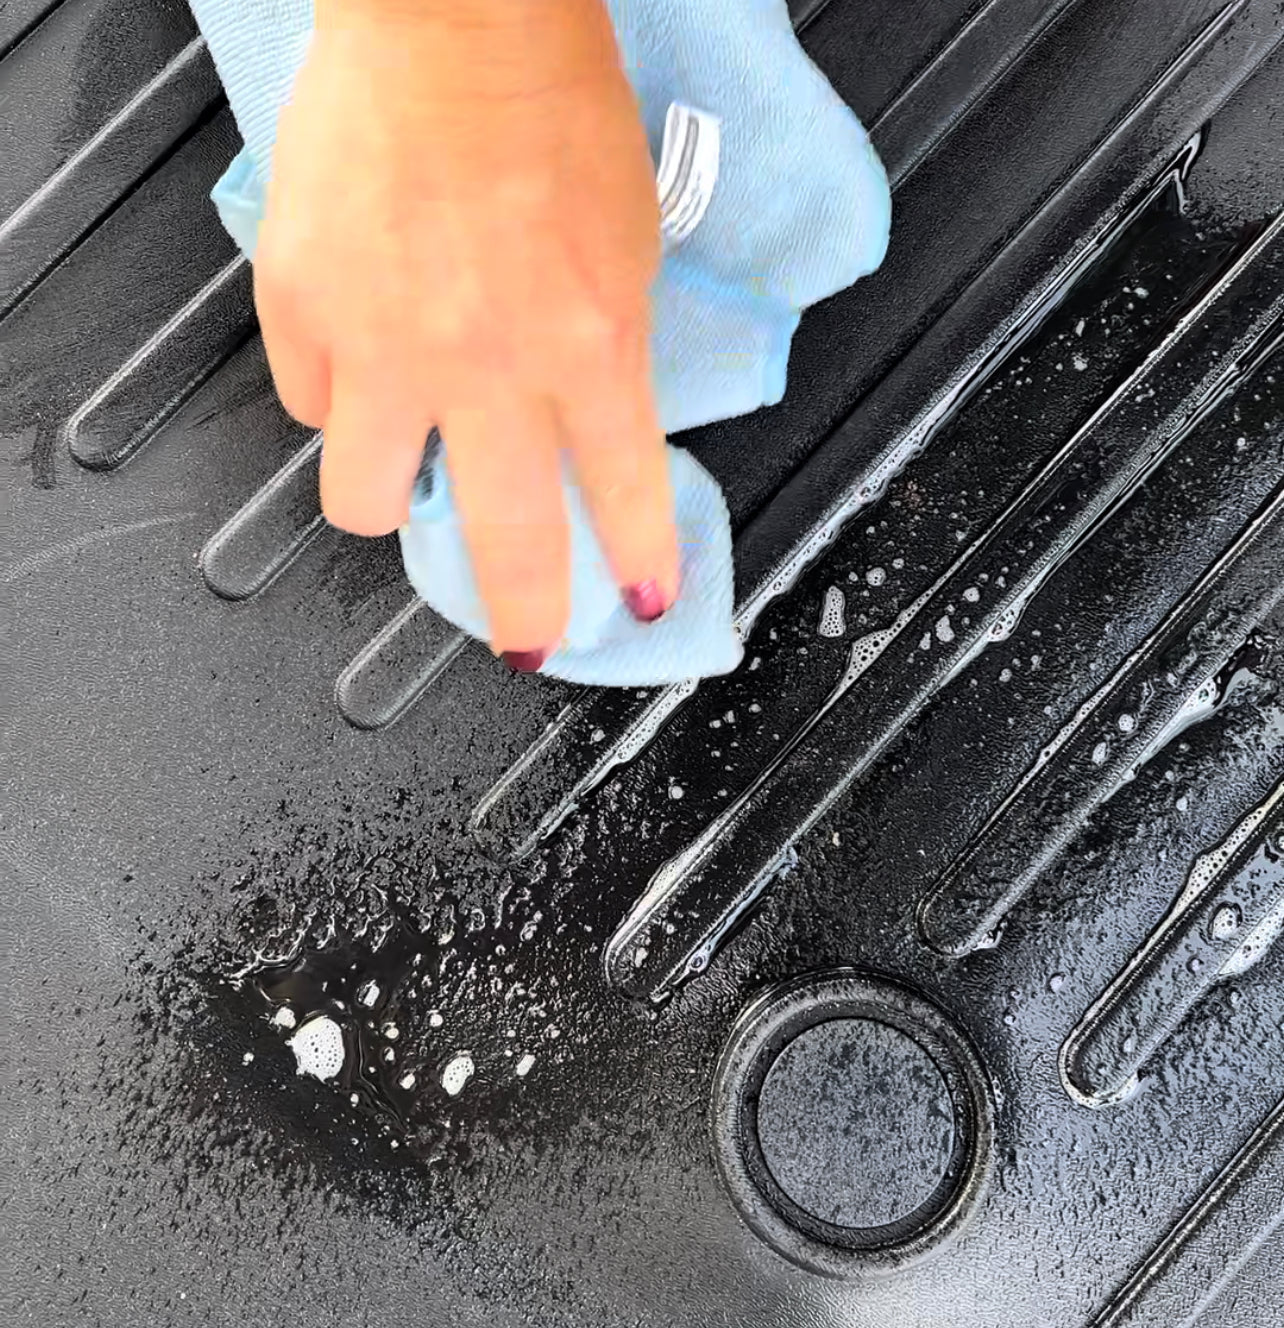 Smart liner Cleaning Hacks- Easiest way to keep your Vehicle Clean